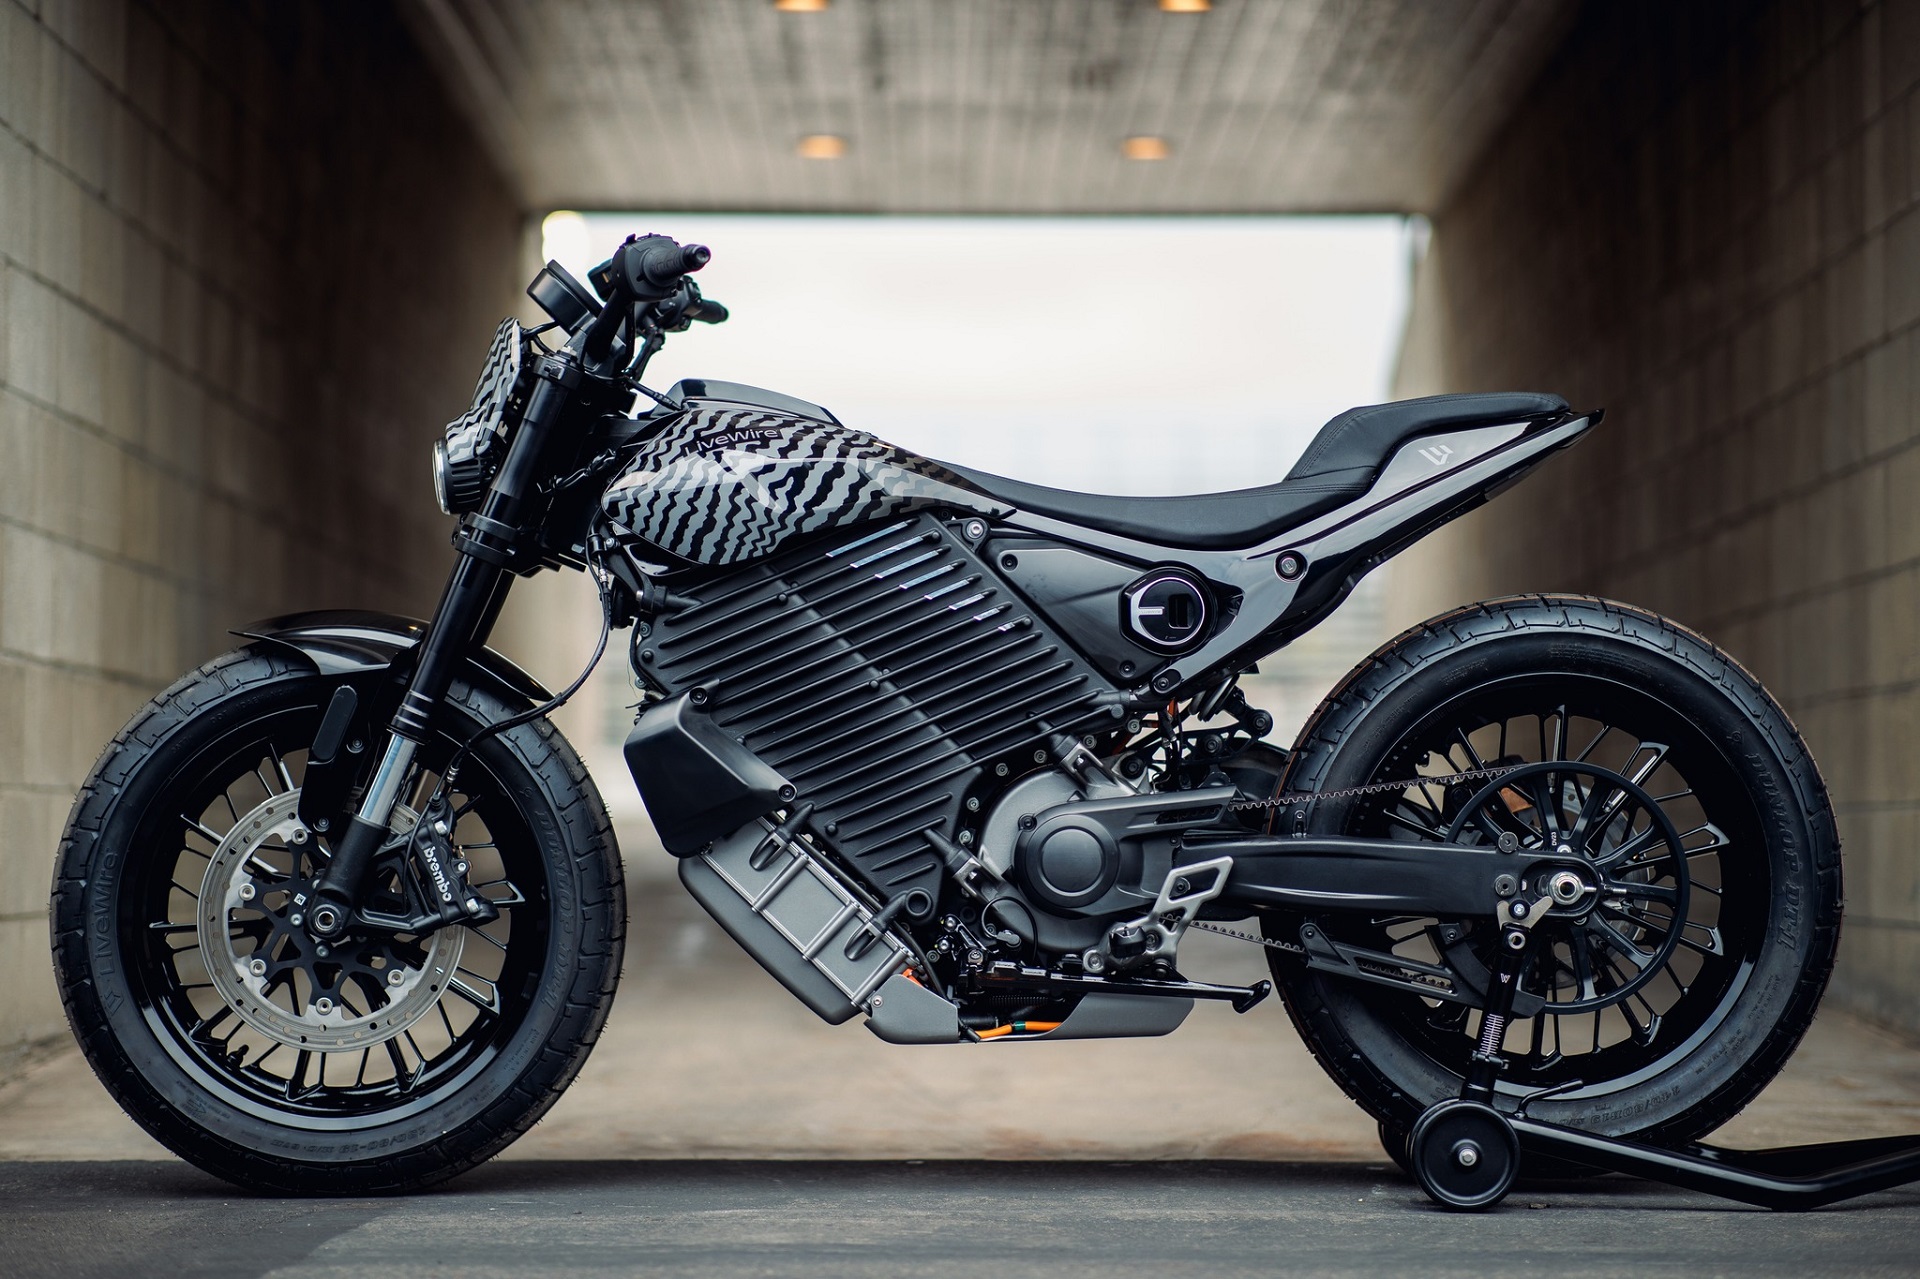 Harley's LiveWire Del Mar - an electric middleweight motorcycle that sold out in under 19 minutes at the initial debut of the launch edition.